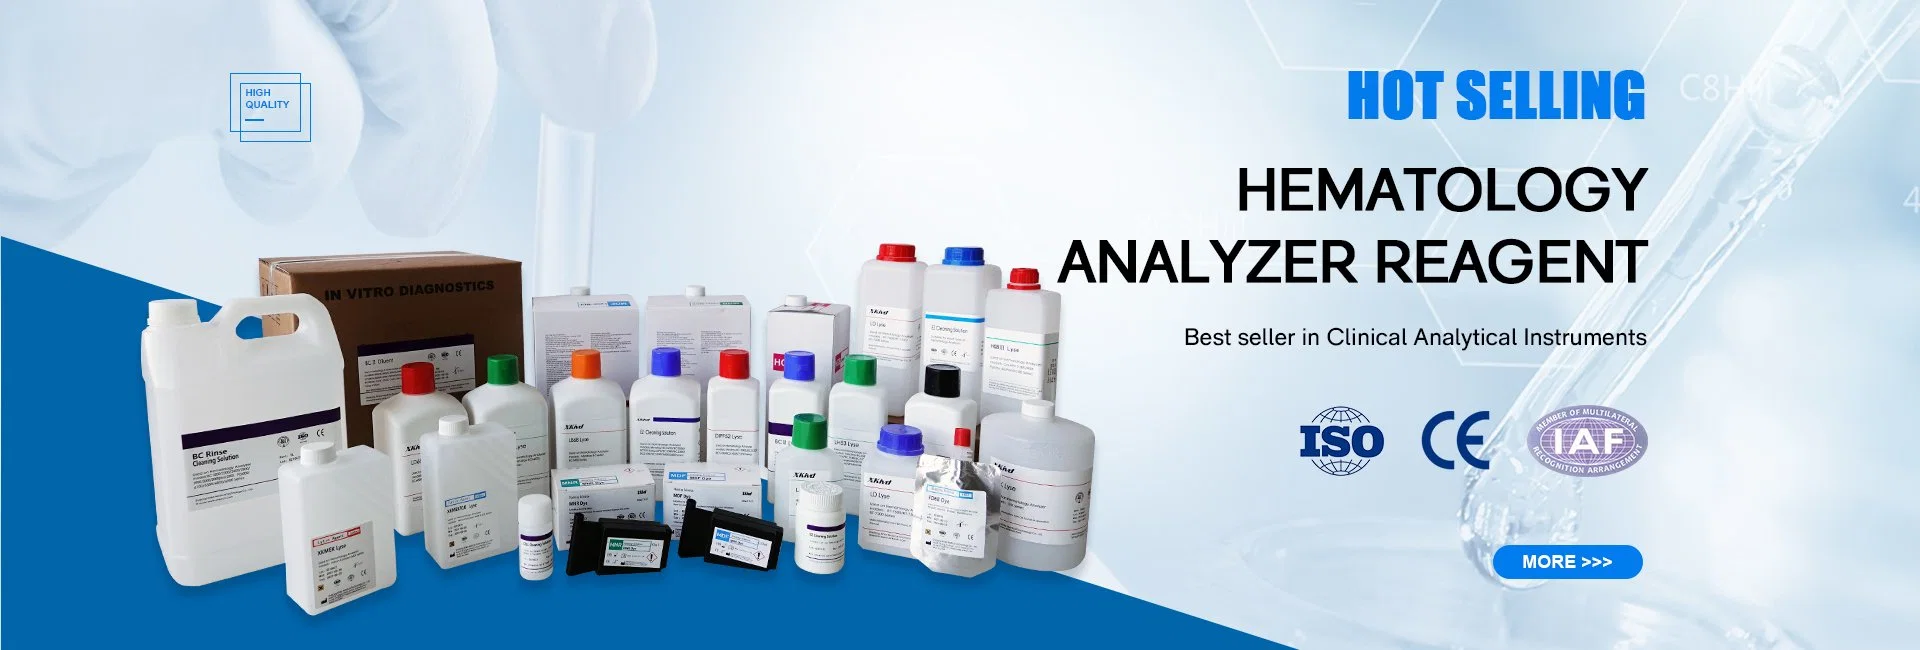 Fluorocell Sysmex Hematology Analyzer Reagent Sysmex Xn-1000 Xn350/550 Cellpack Dcl Cellpack Lyse Cell Cleaner